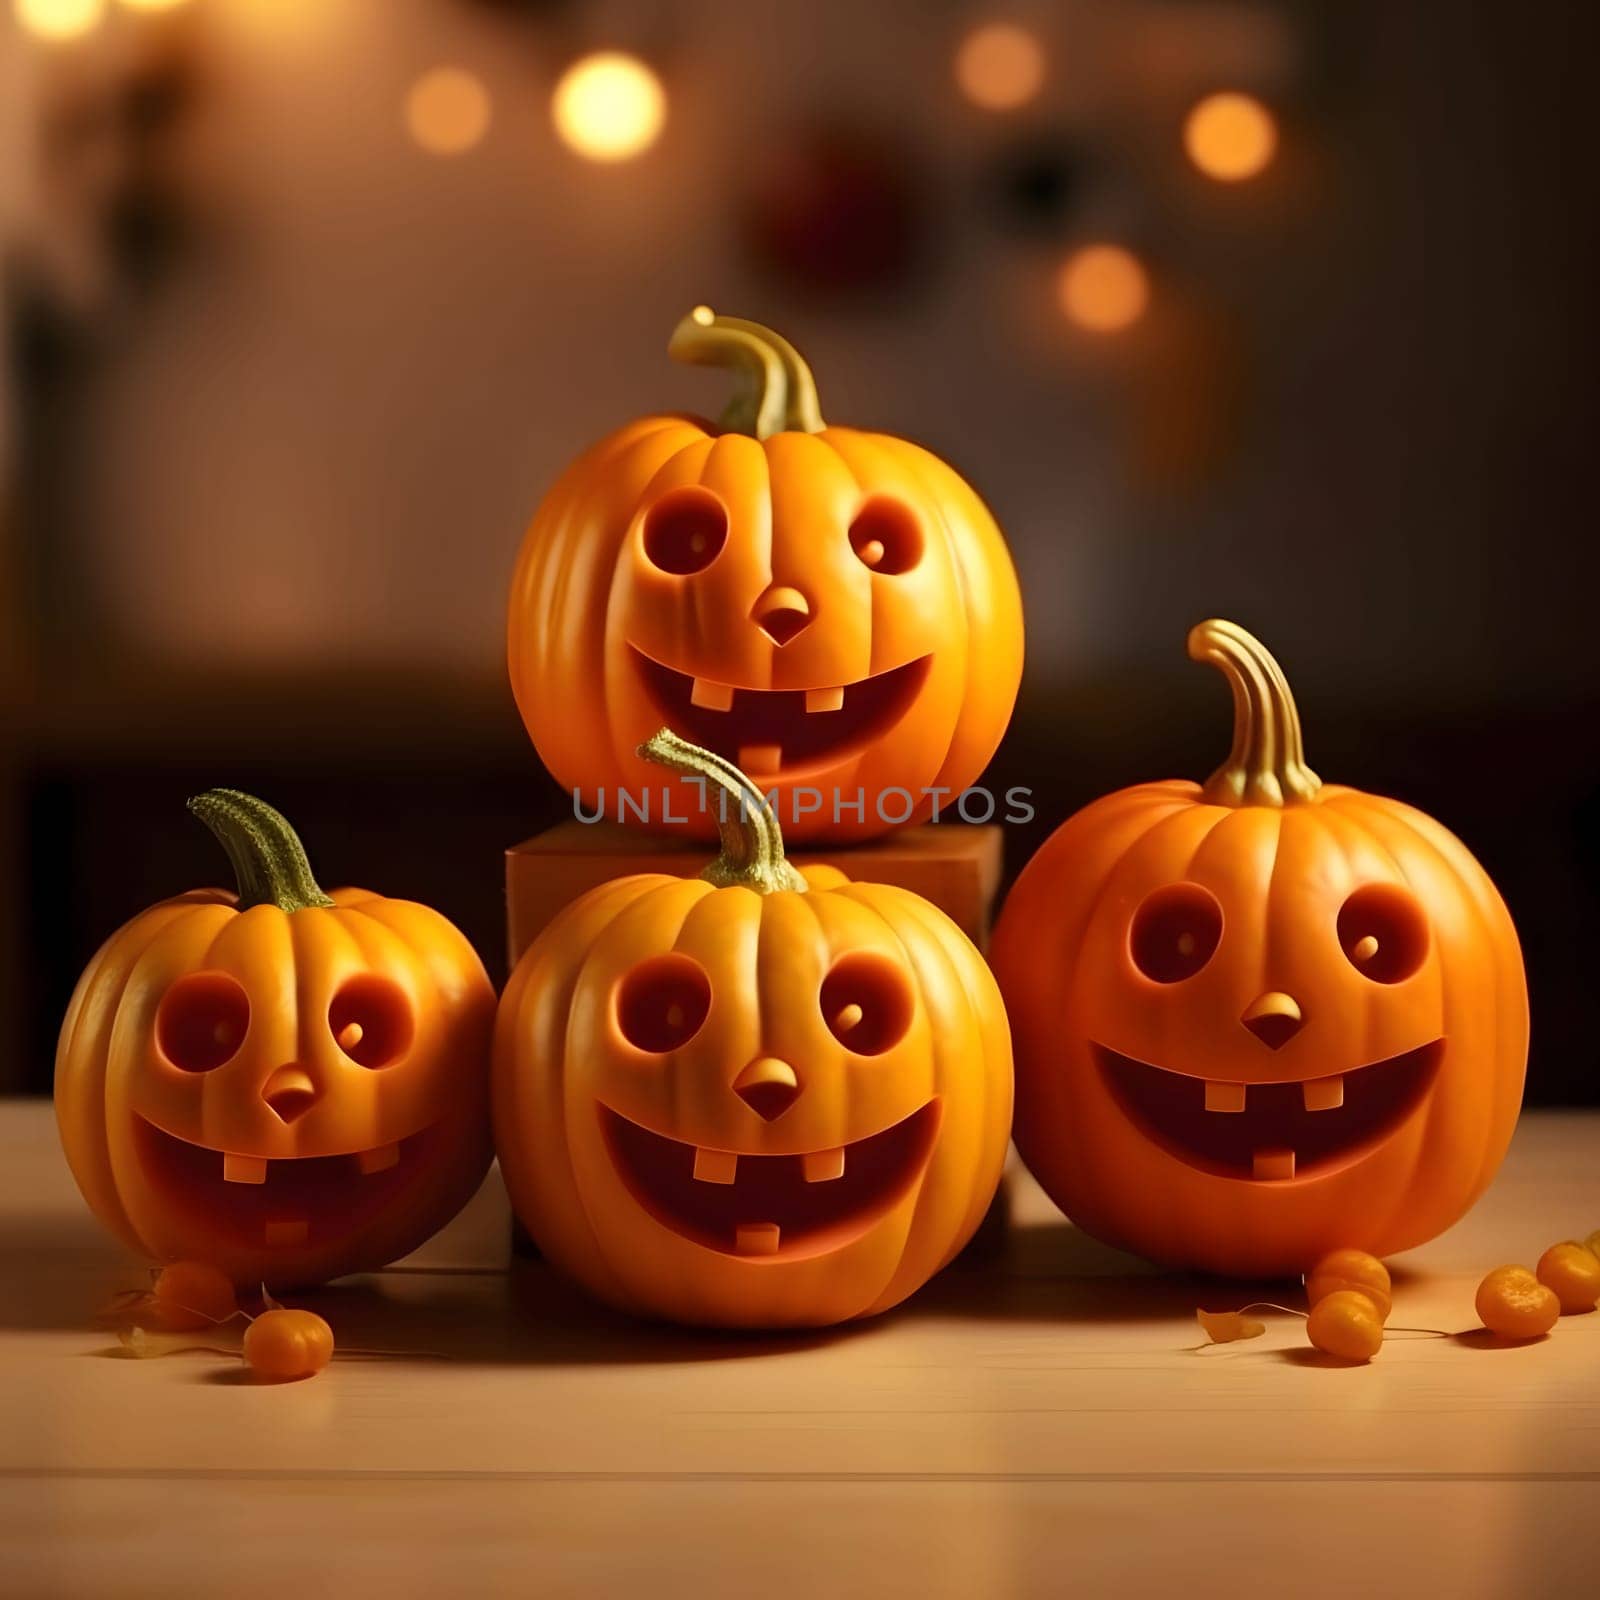 Four small, stacked side by side smiling gouged jack-o-lantern pumpkins on a smudged background, a Halloween image. Atmosphere of darkness and fear.